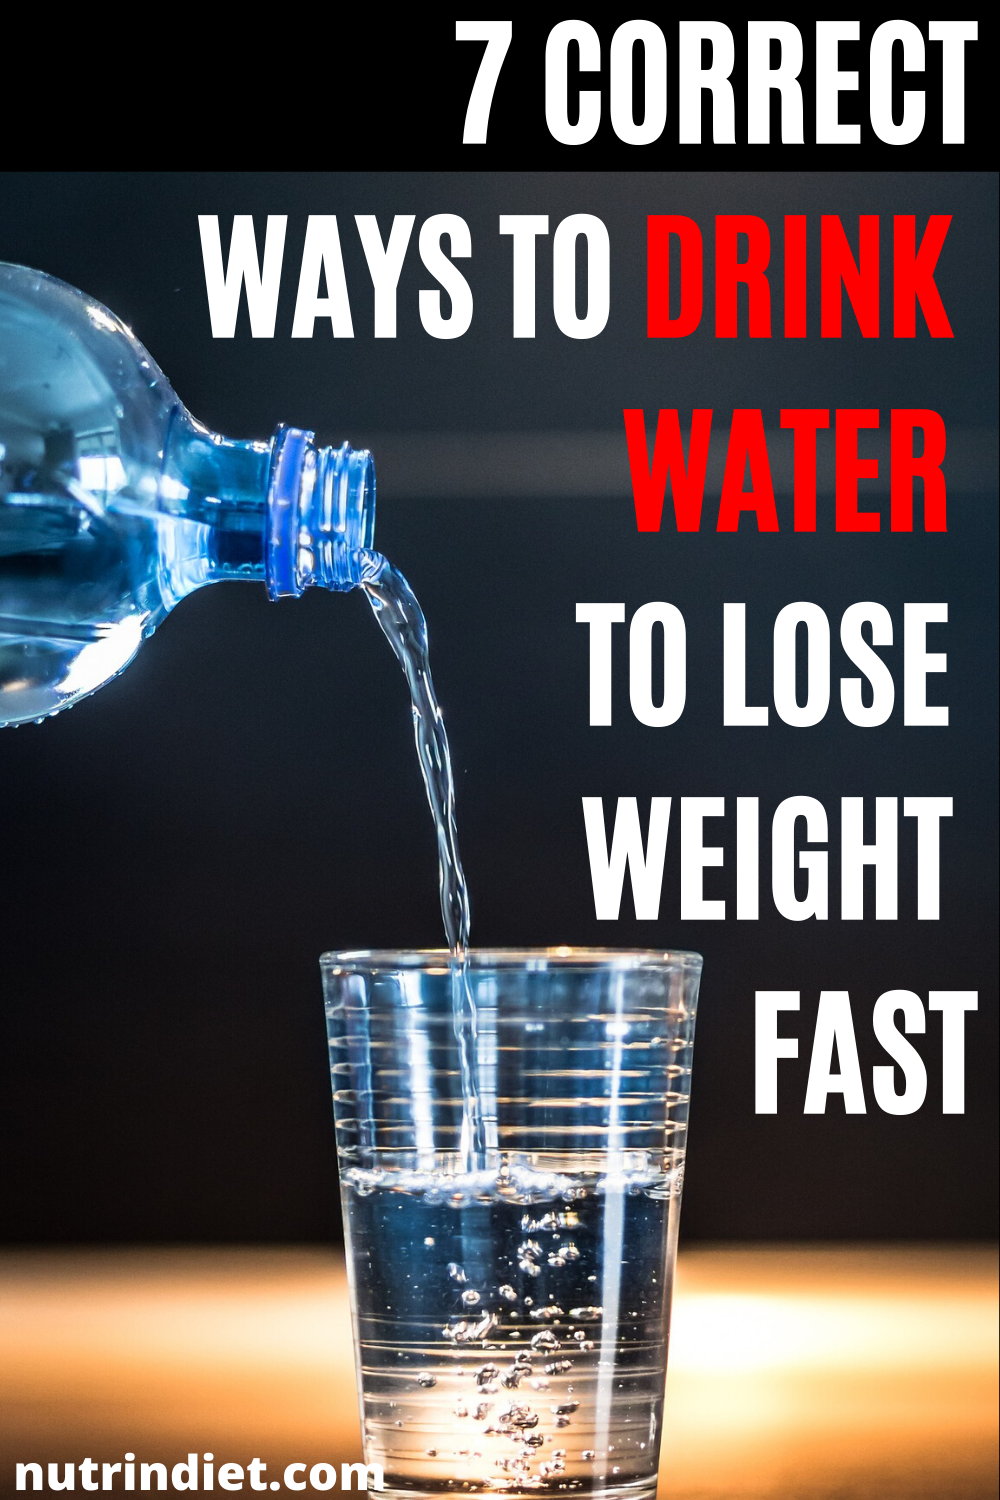 Lose Help Water Can Drinking Fast You Weight How